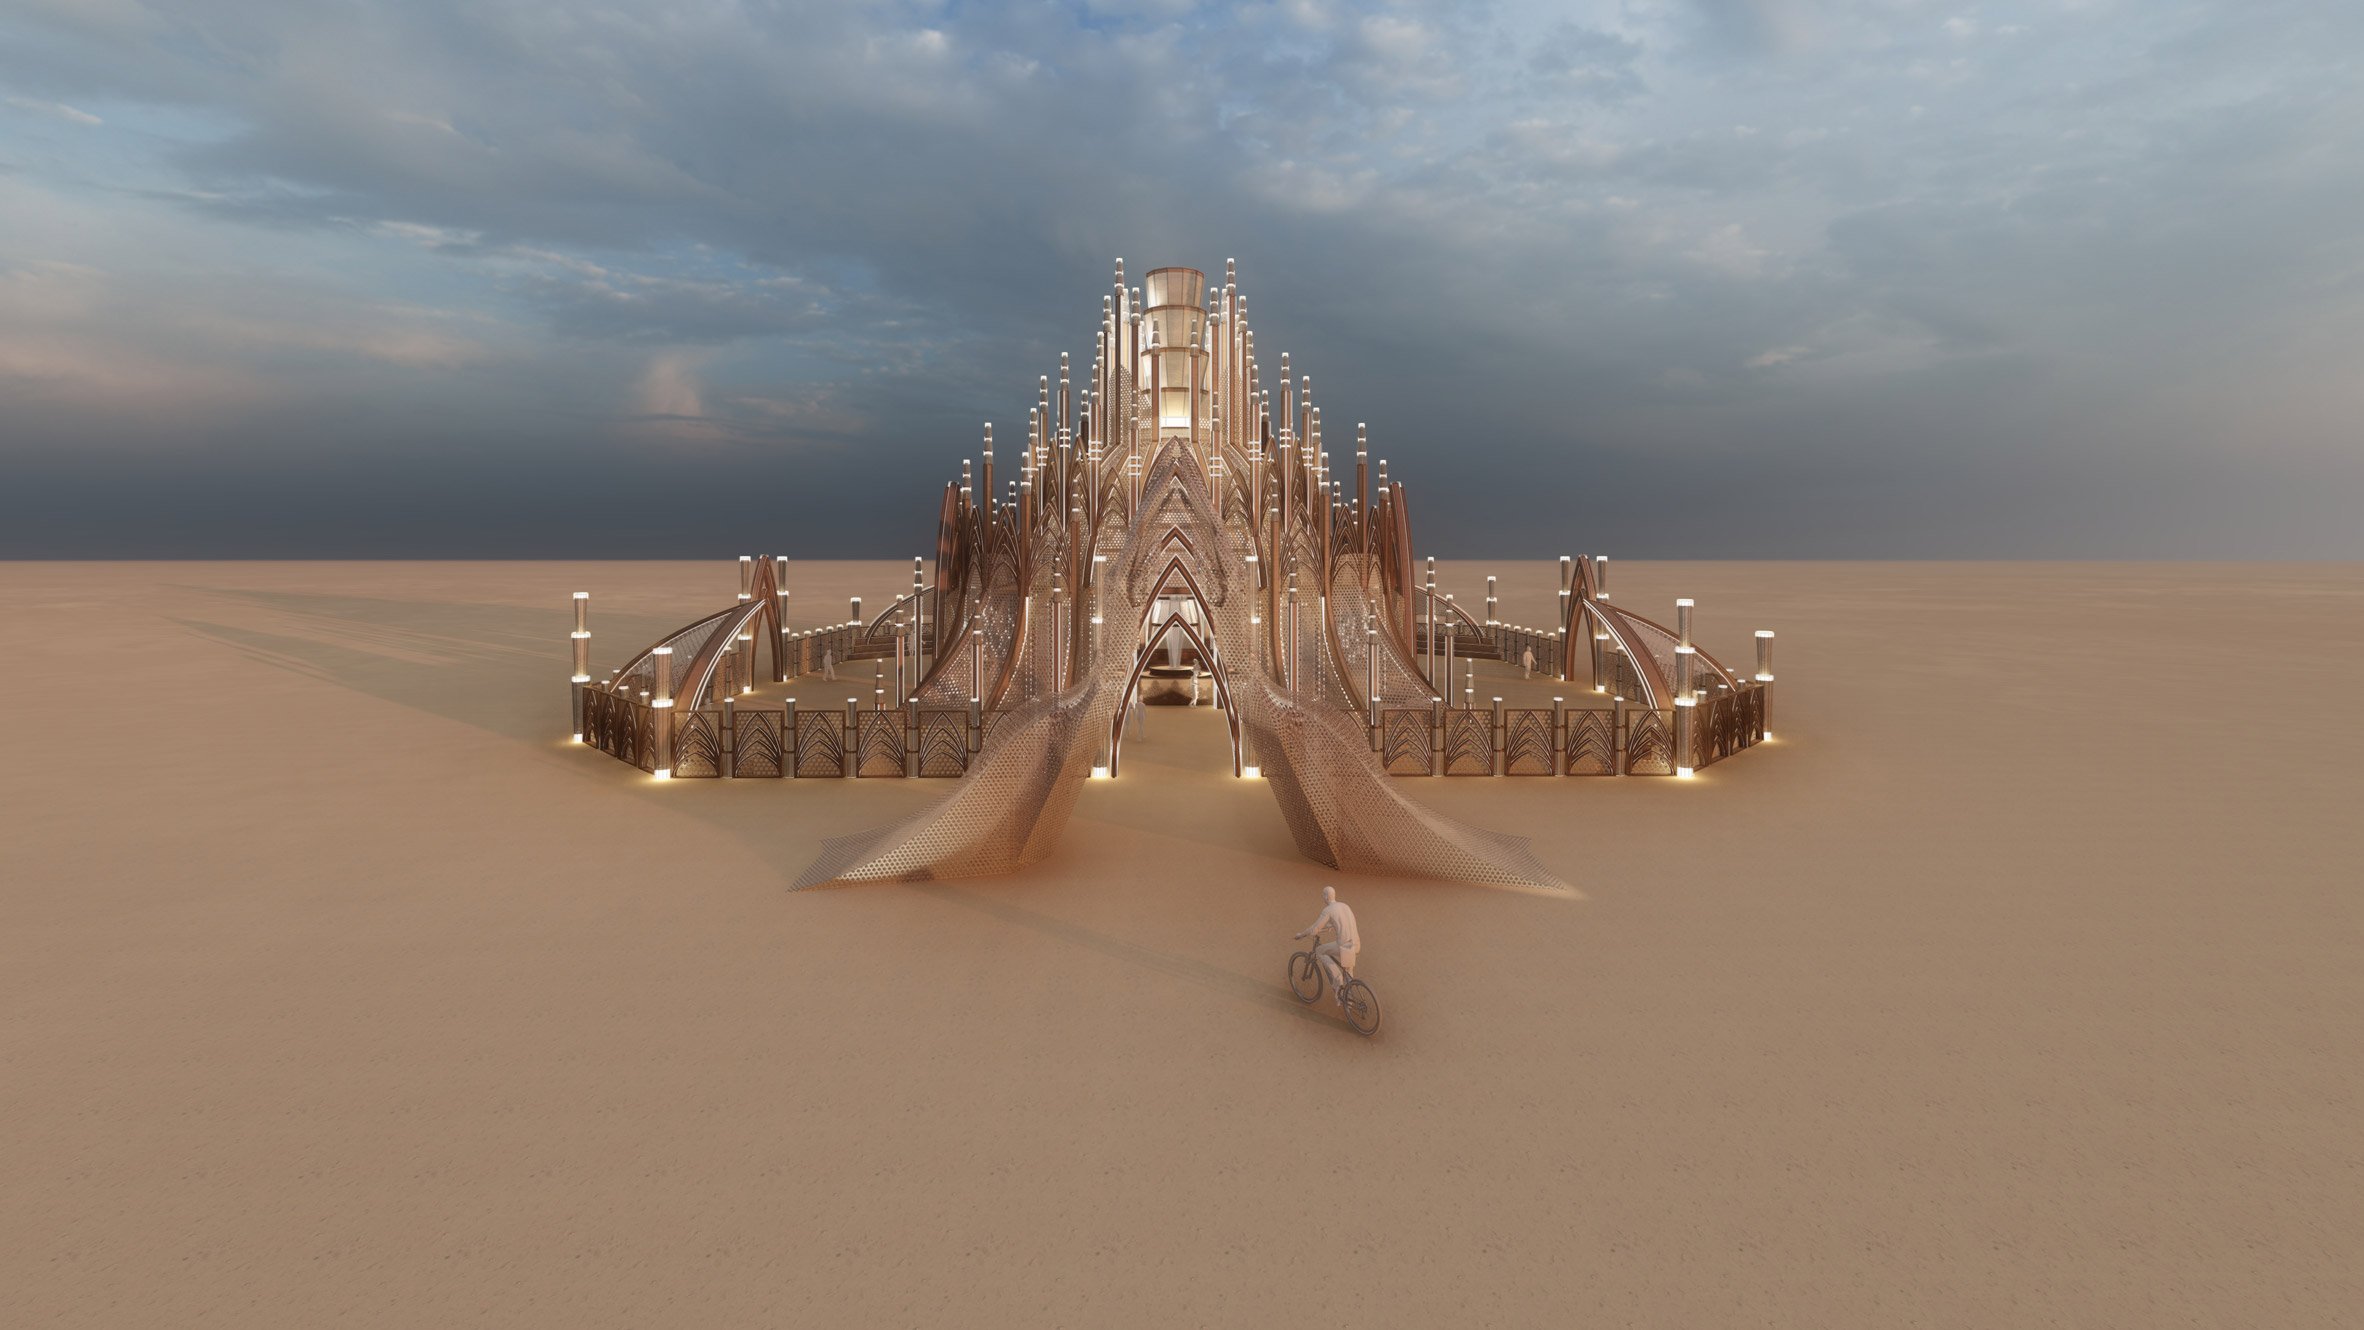 View of Burning Man temple rendering with bicyclist